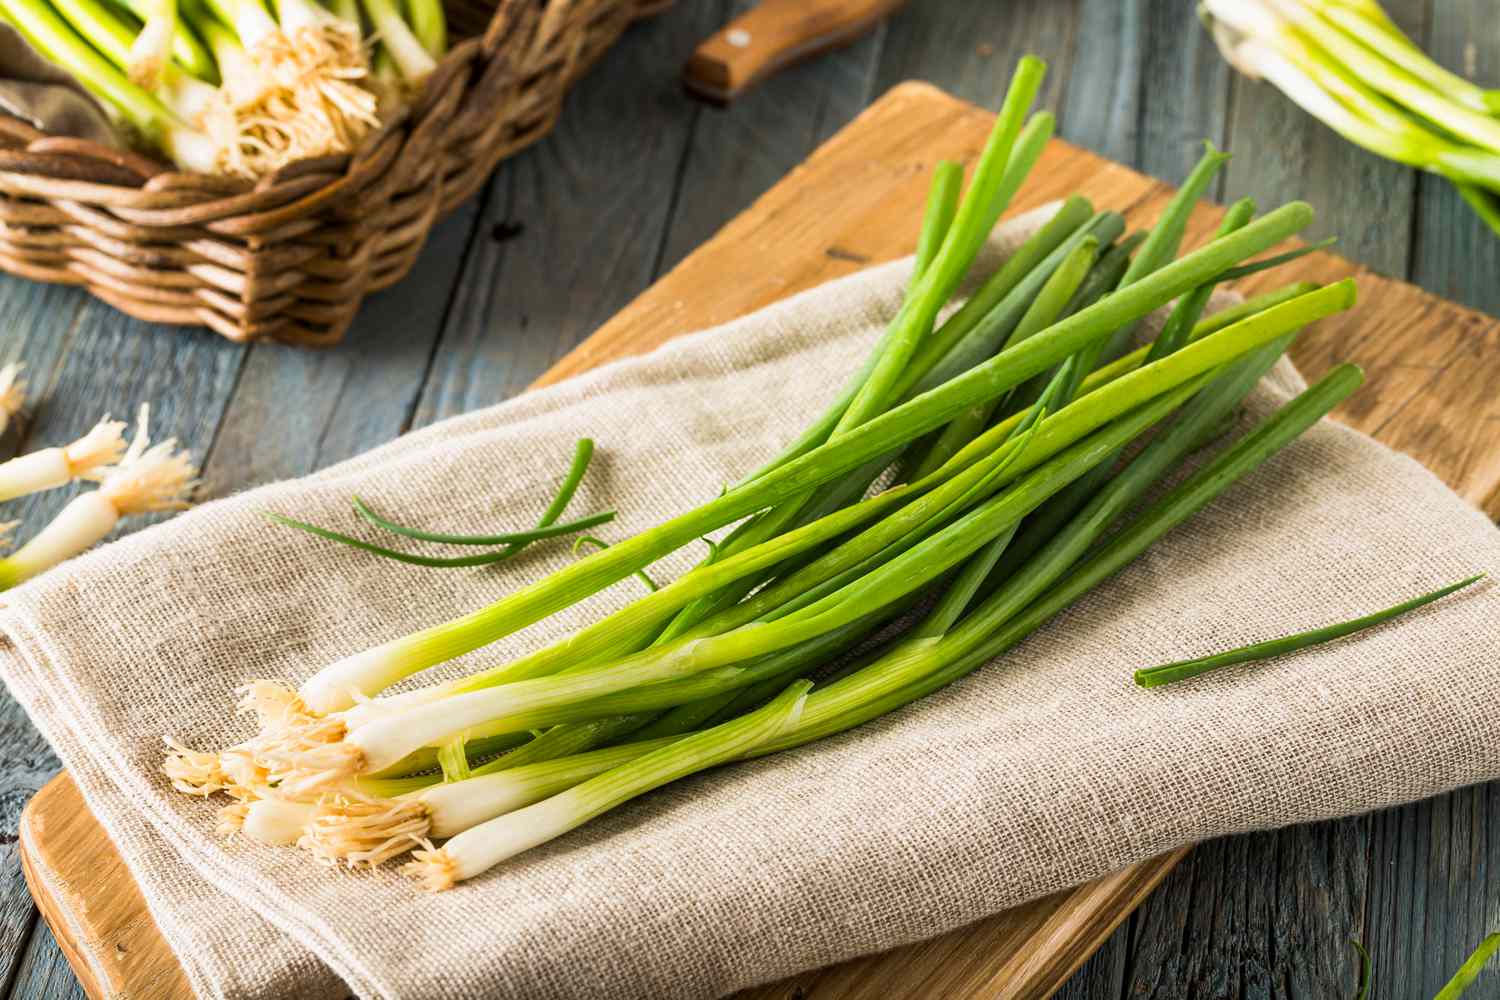 How To Store Scallions In The Refrigerator